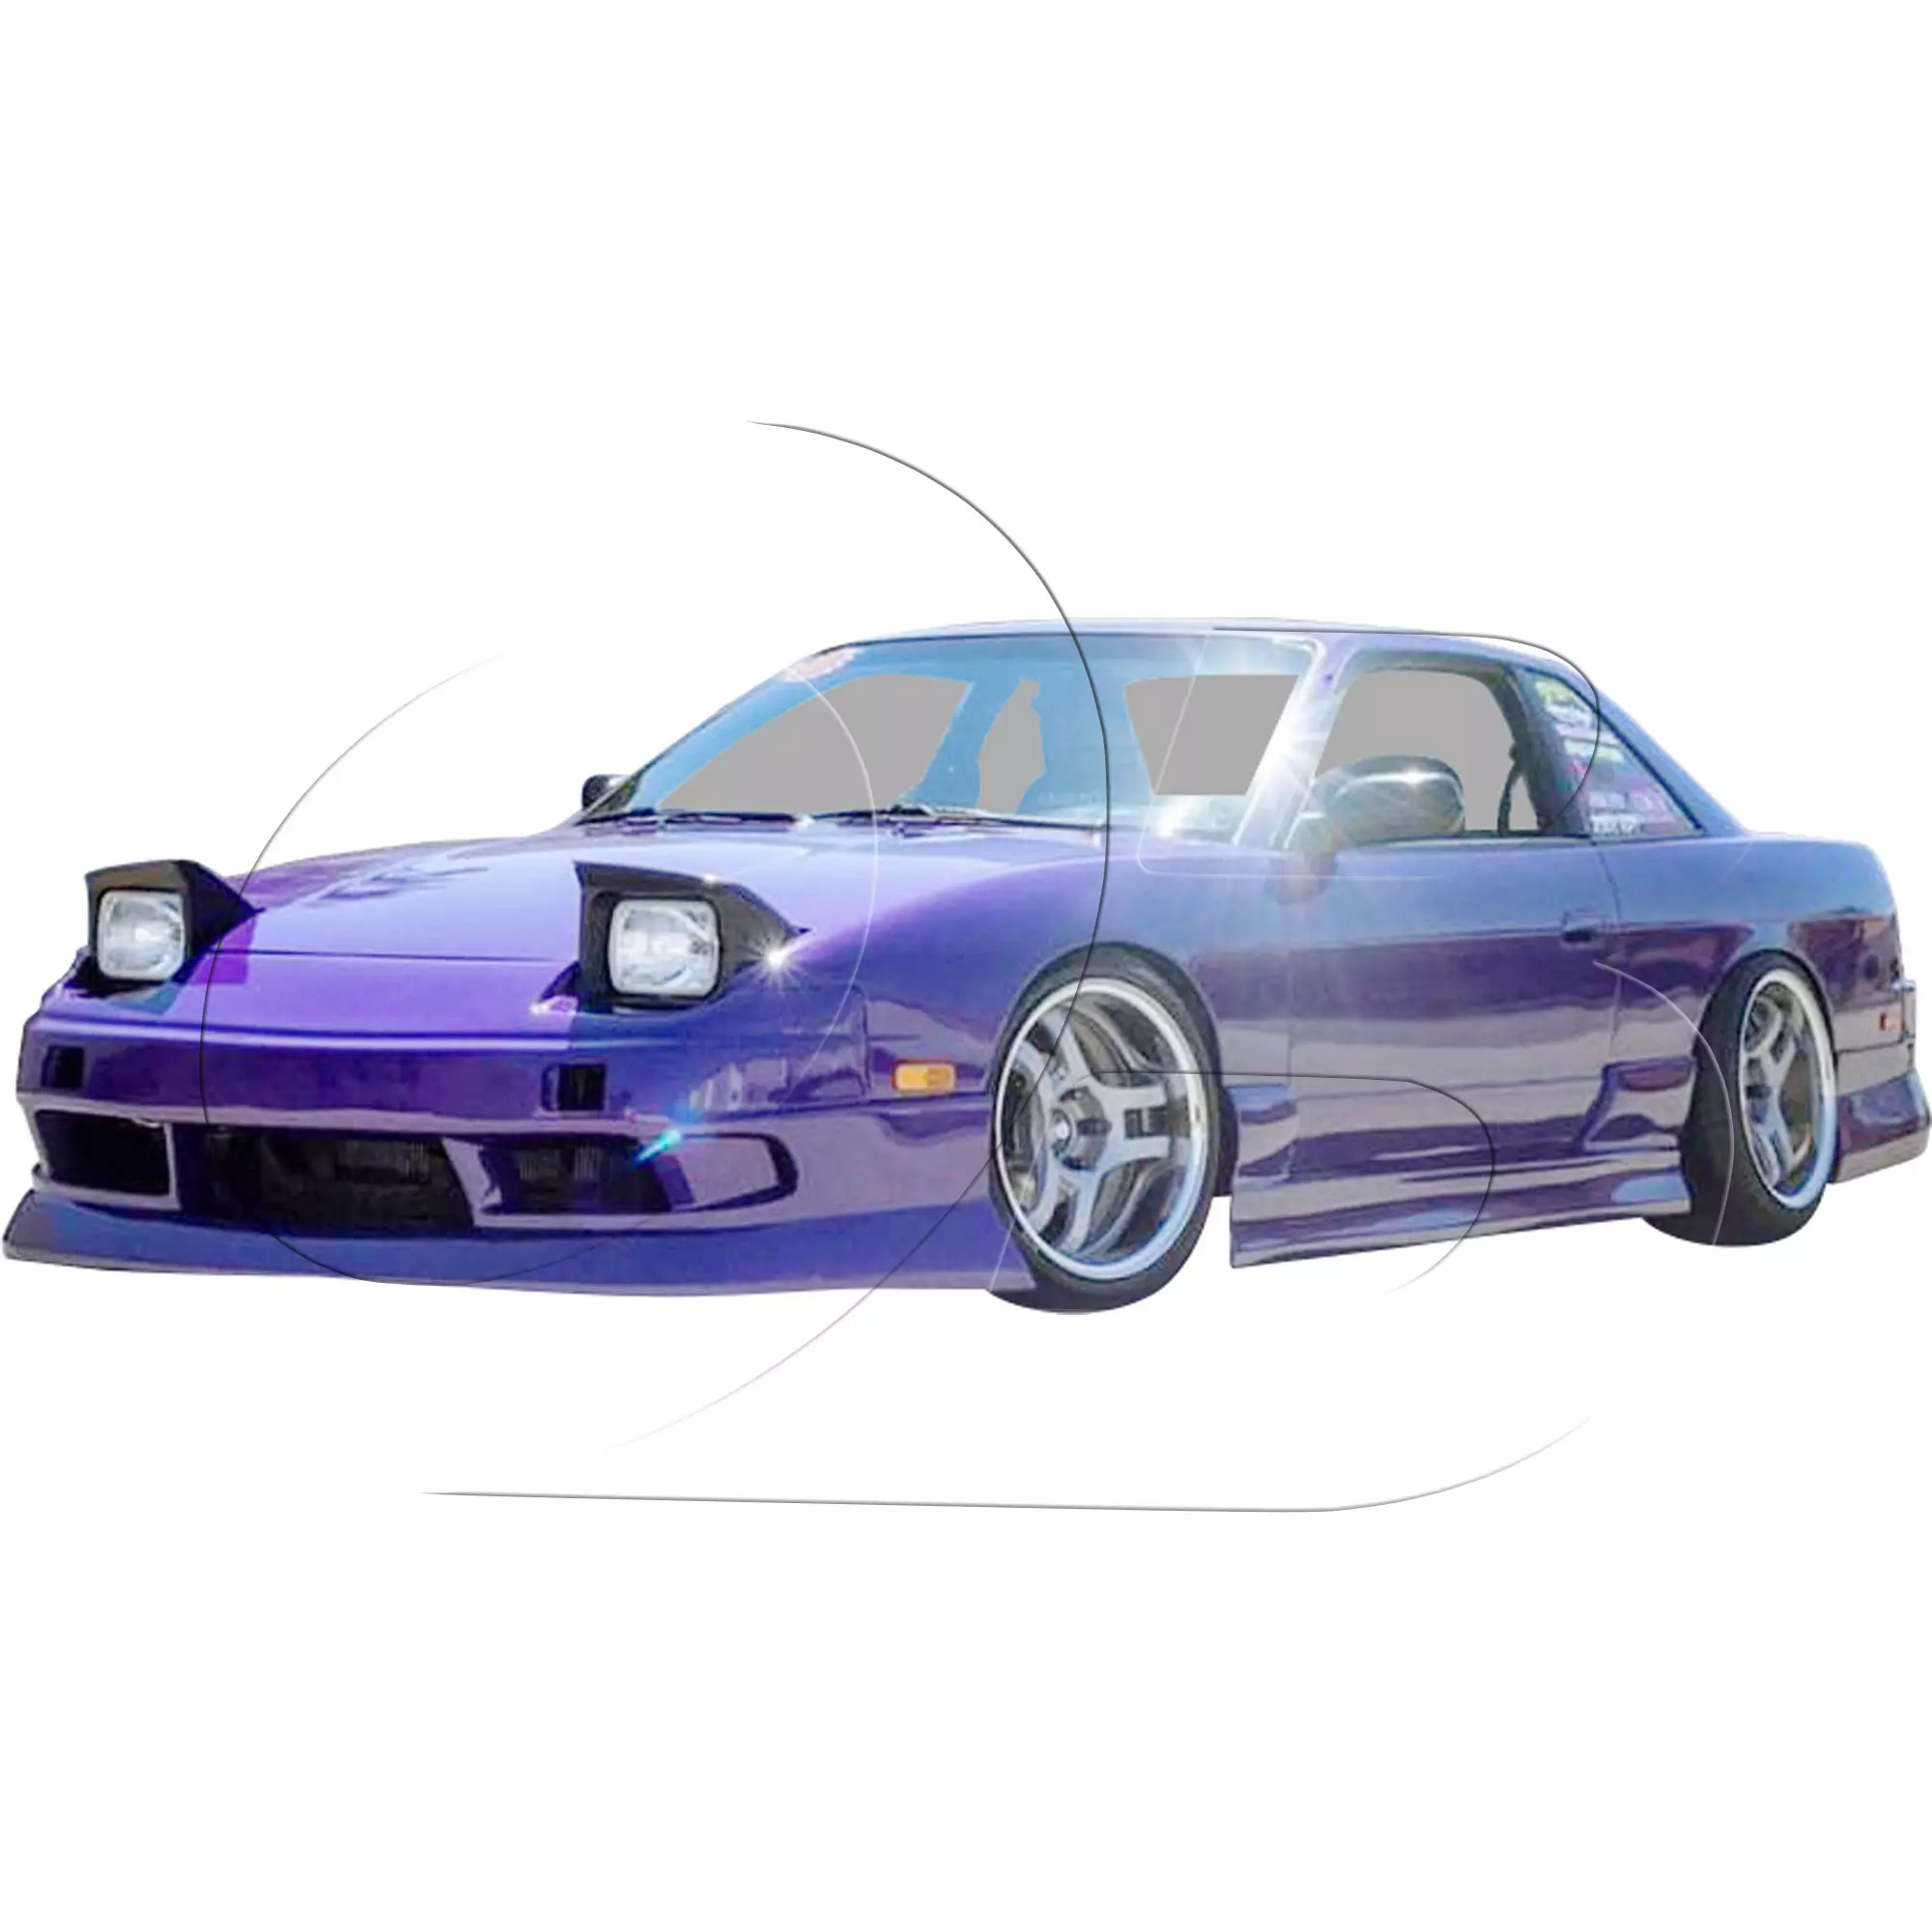 KBD Urethane Bsport2 Style 4pc Full Body Kit > Nissan 240SX 1989-1994 > 2dr Coupe - Image 10